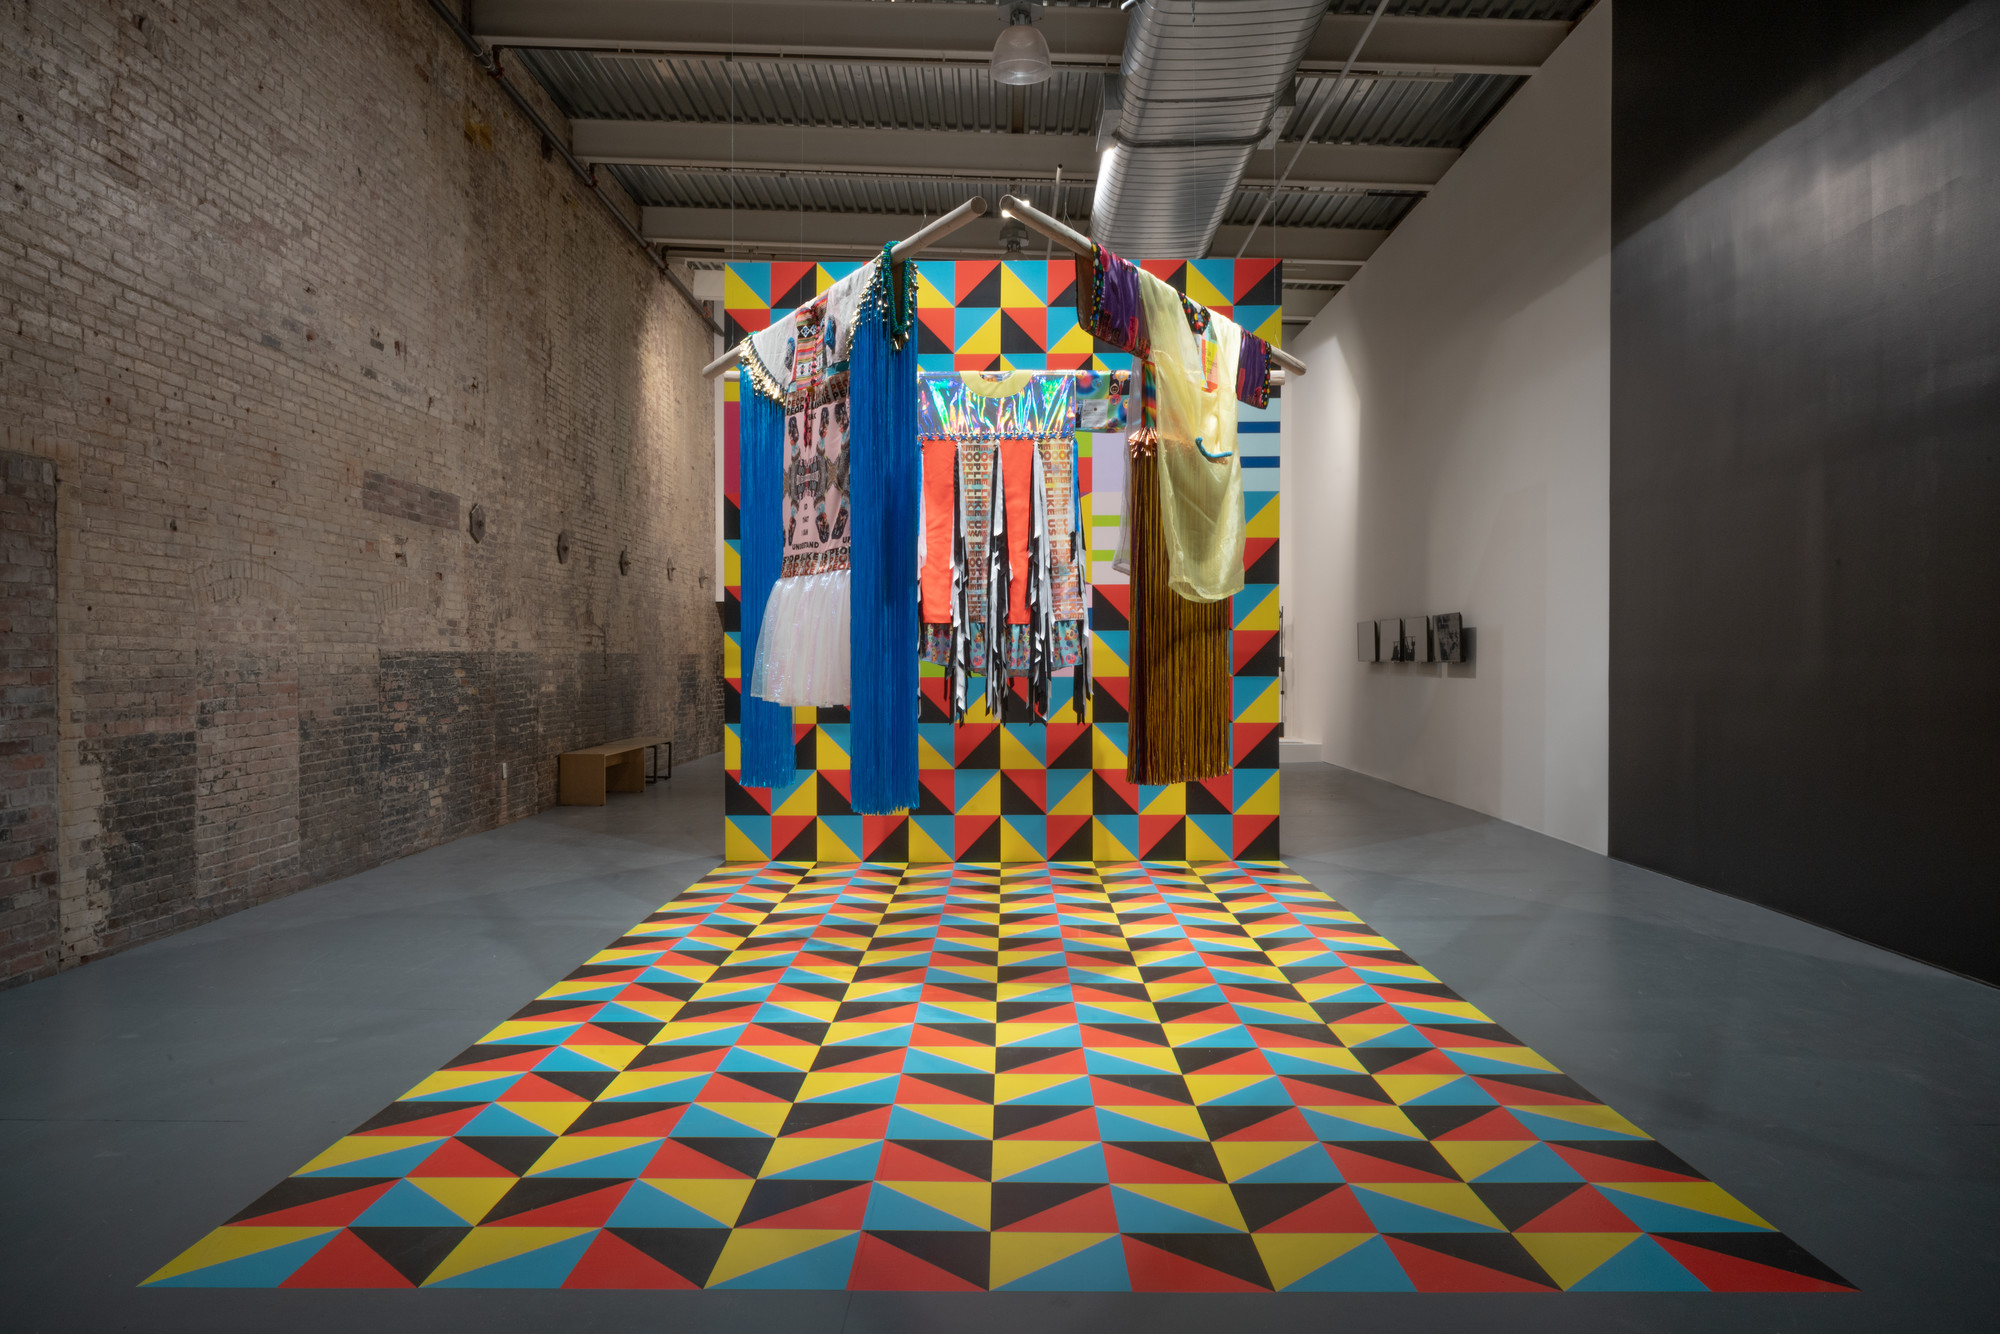 Photograph of Jeffrey Gibson works as installed in the exhibition 'Suffering from Realness' at MASS MoCA.